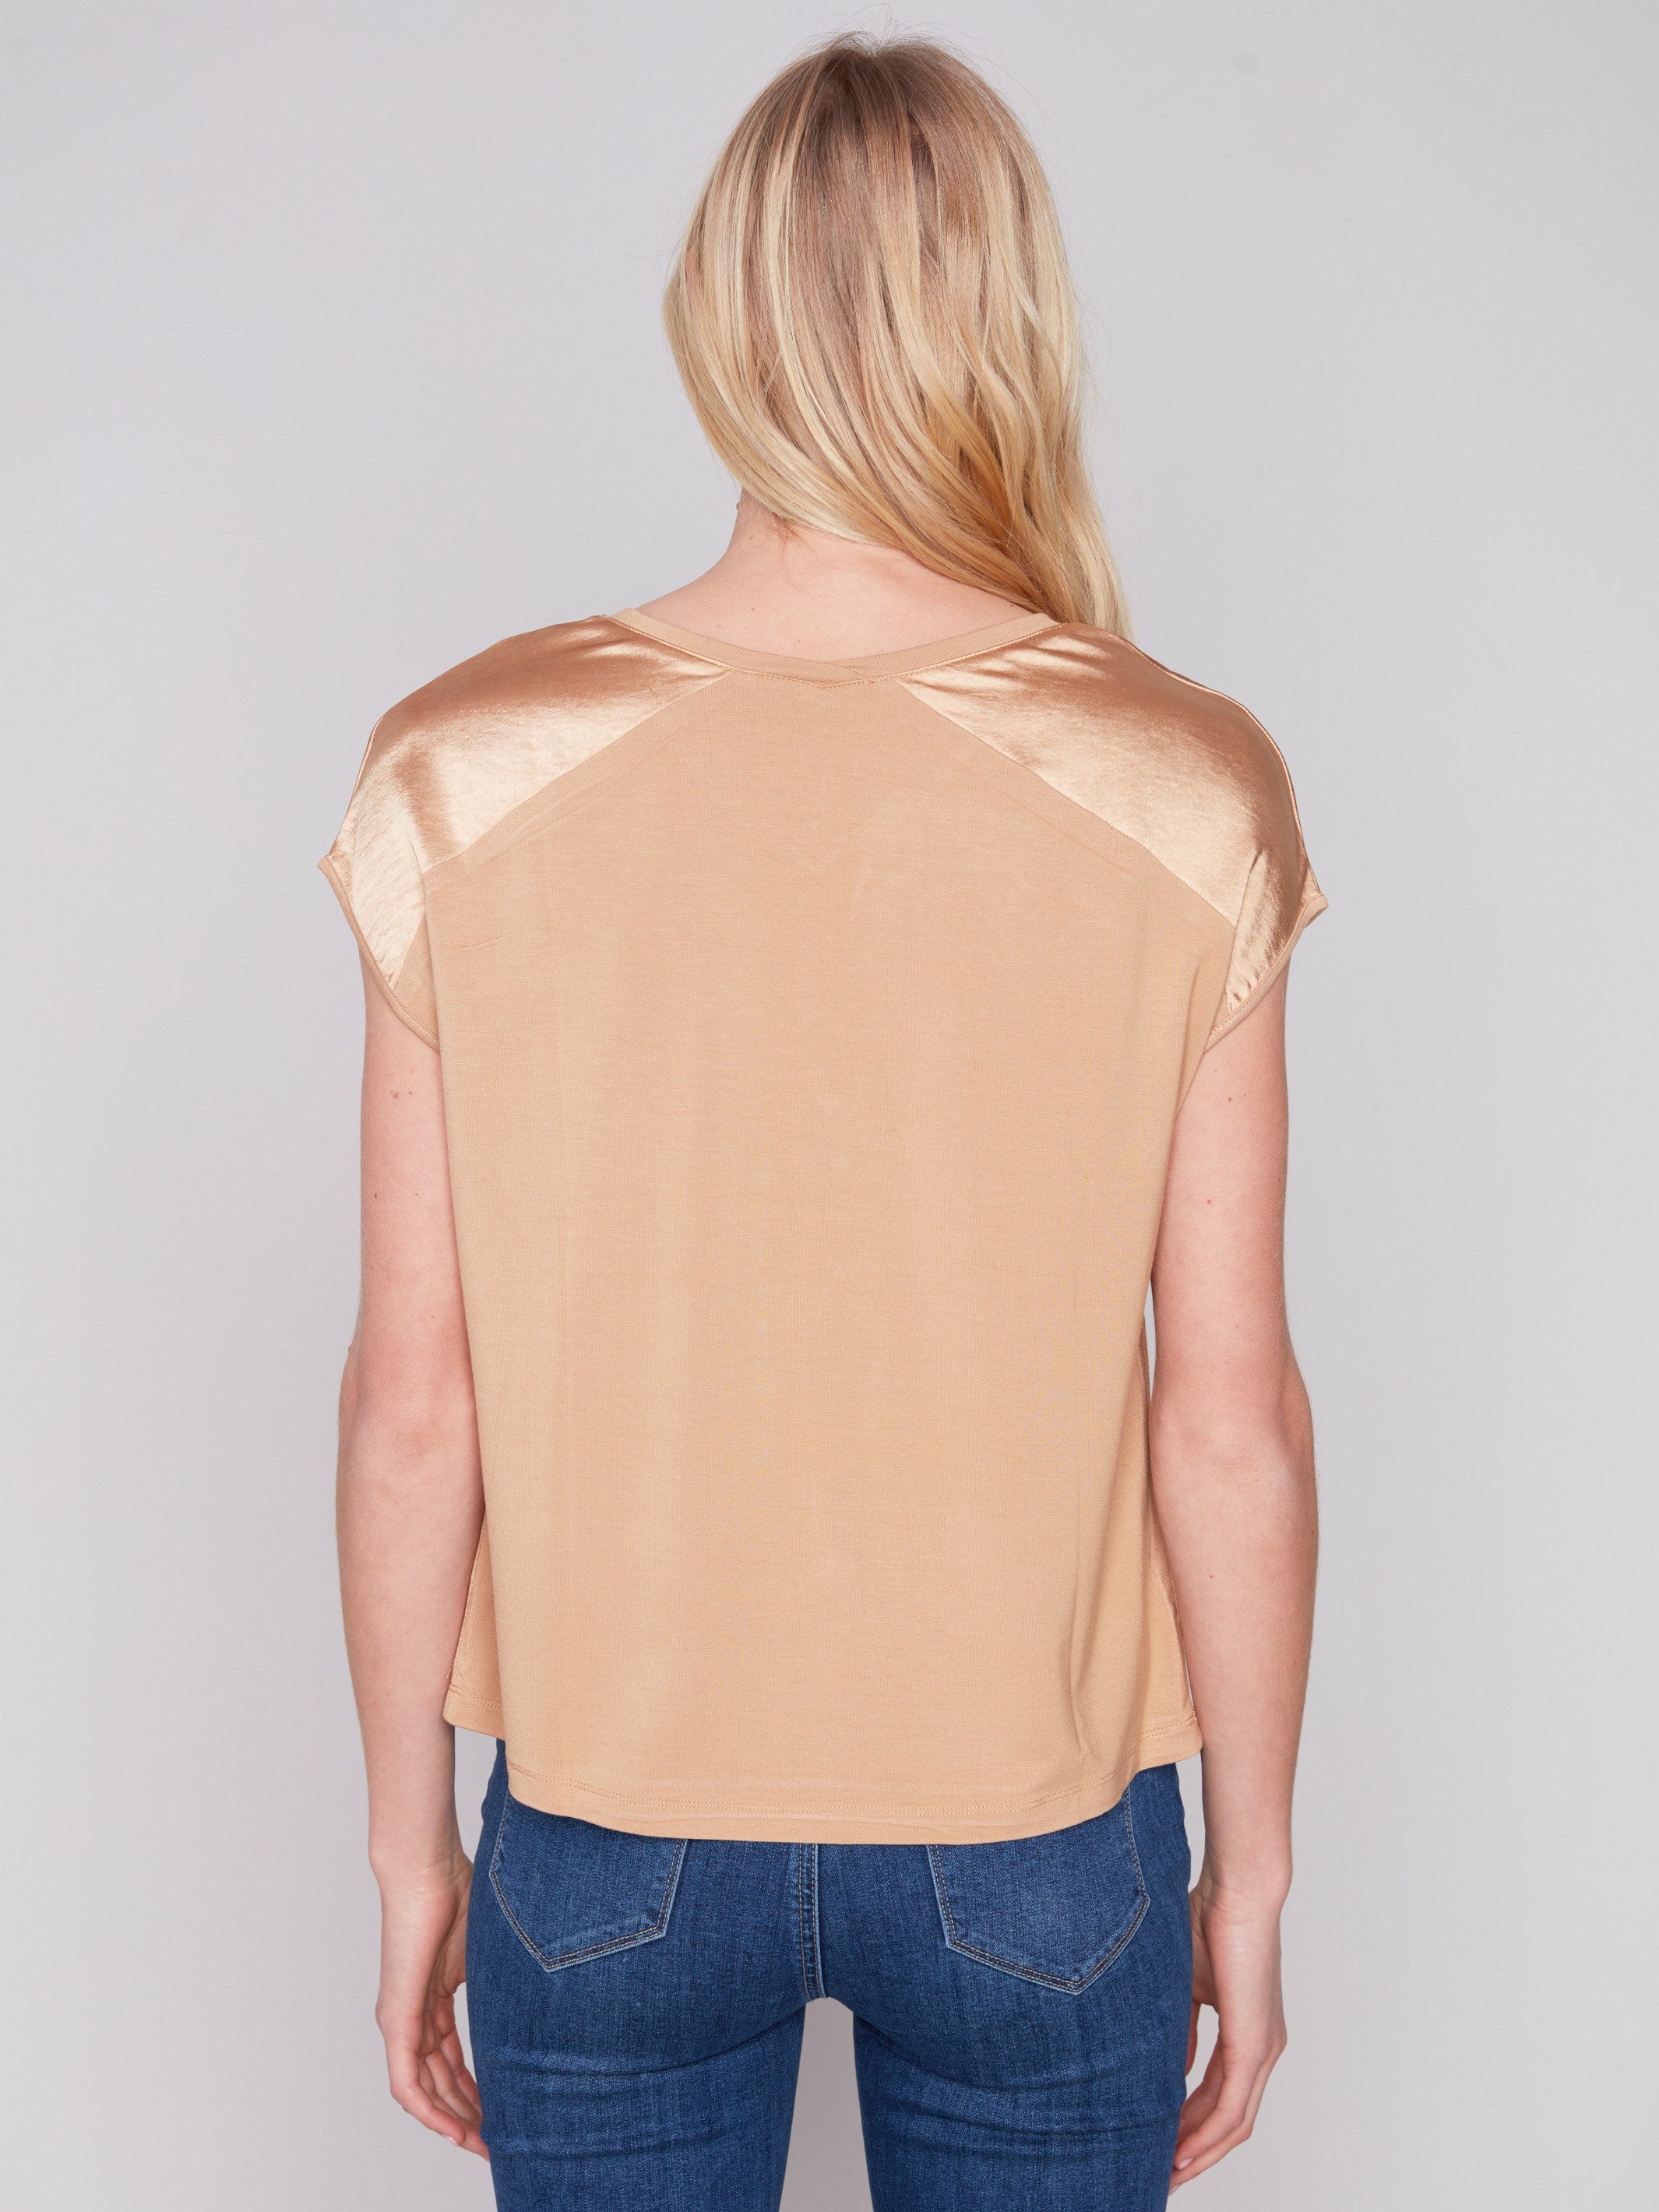 Satin V-Neck Knit Top - Corn - Charlie B Collection Canada - Image 2